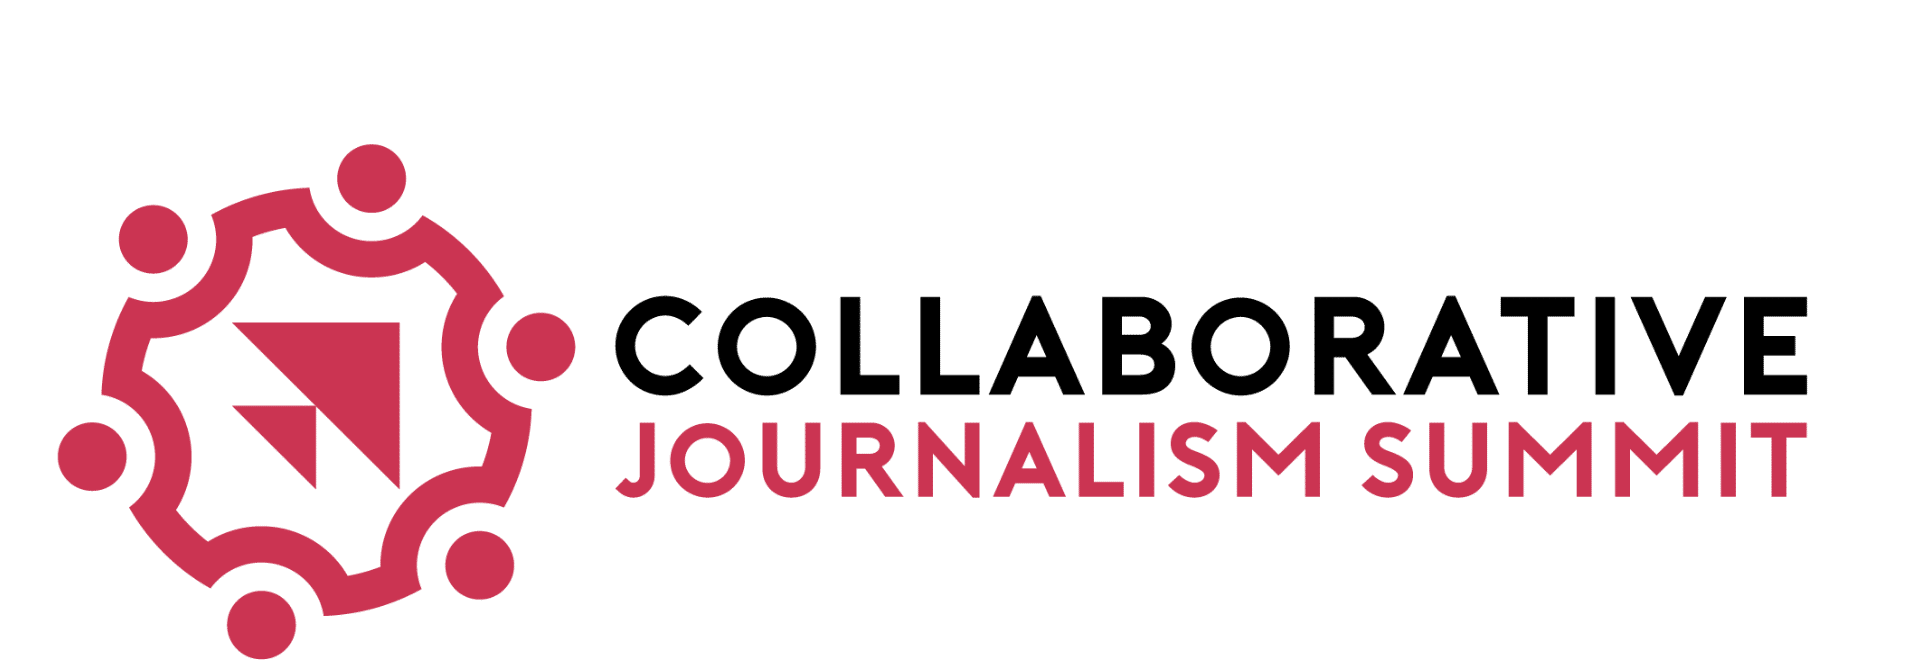 CollaborativeJournalism.org – A hub of resources and ideas.